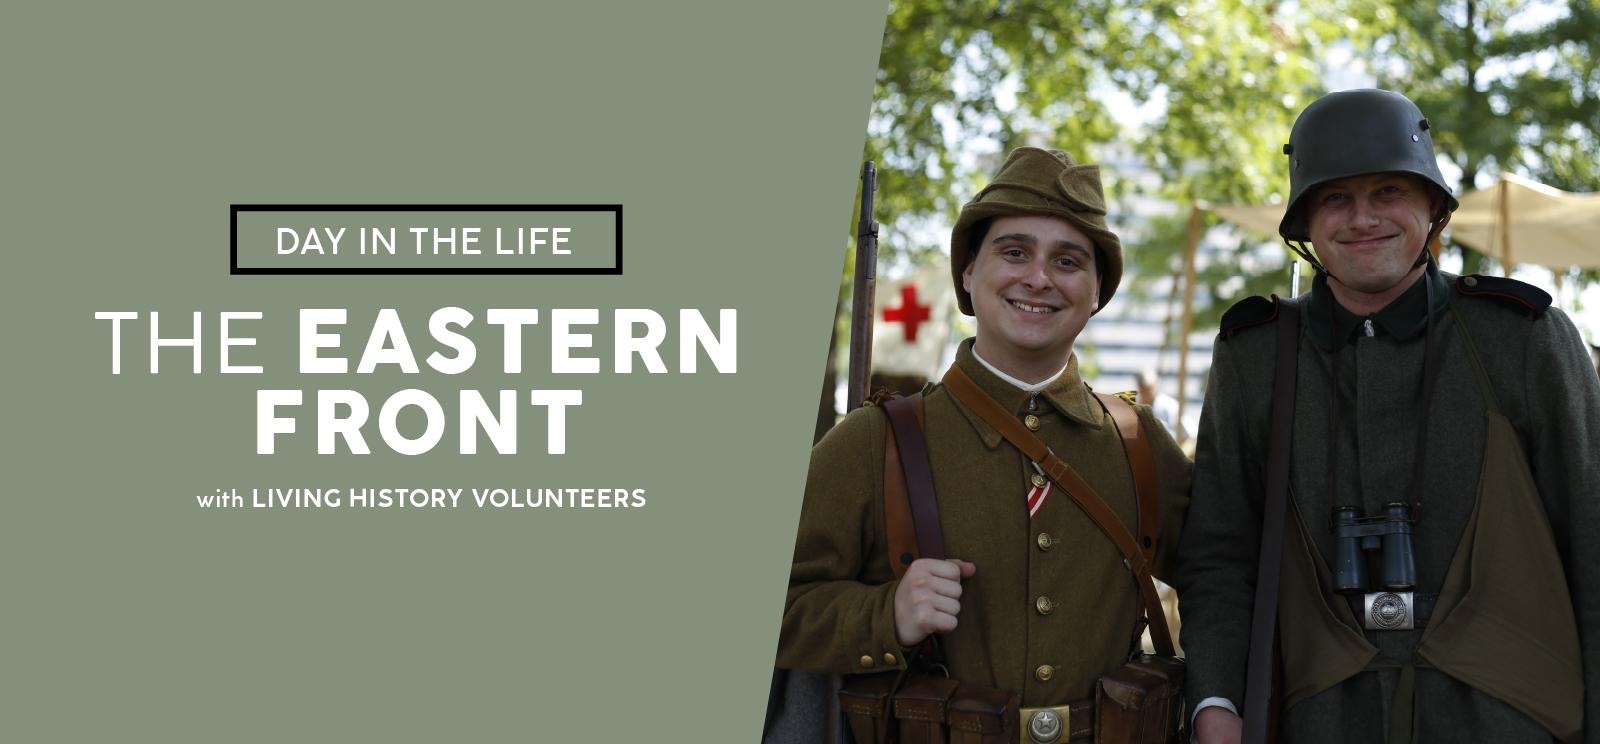 Modern photograph of two young white men smiling at the camera dressed in WWI uniforms. Text: Day in the Life / The Eastern Front